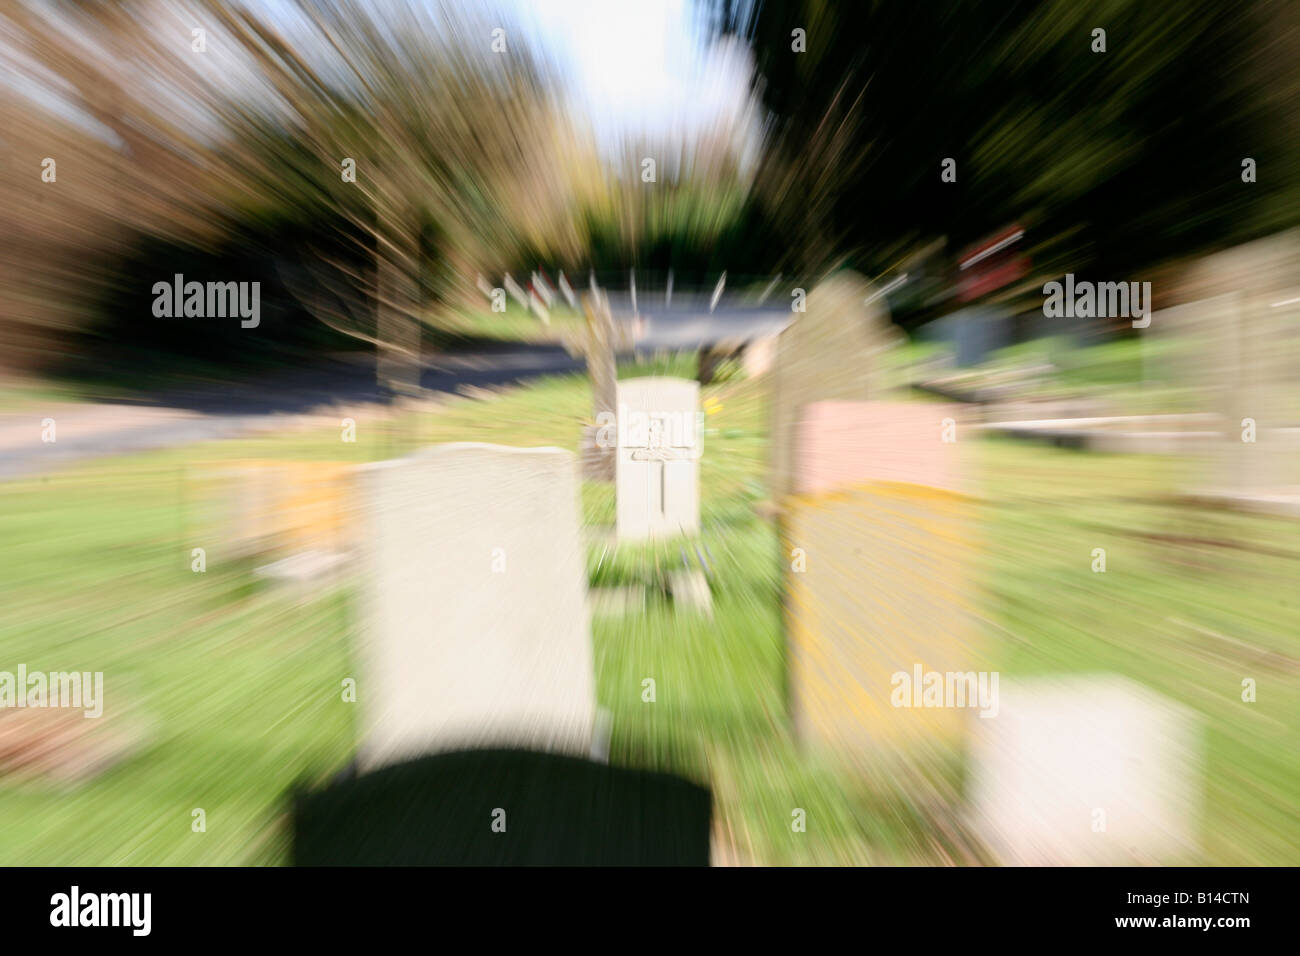 zooming in to a cematary headstone, represents racing headlong towards the end. Stock Photo